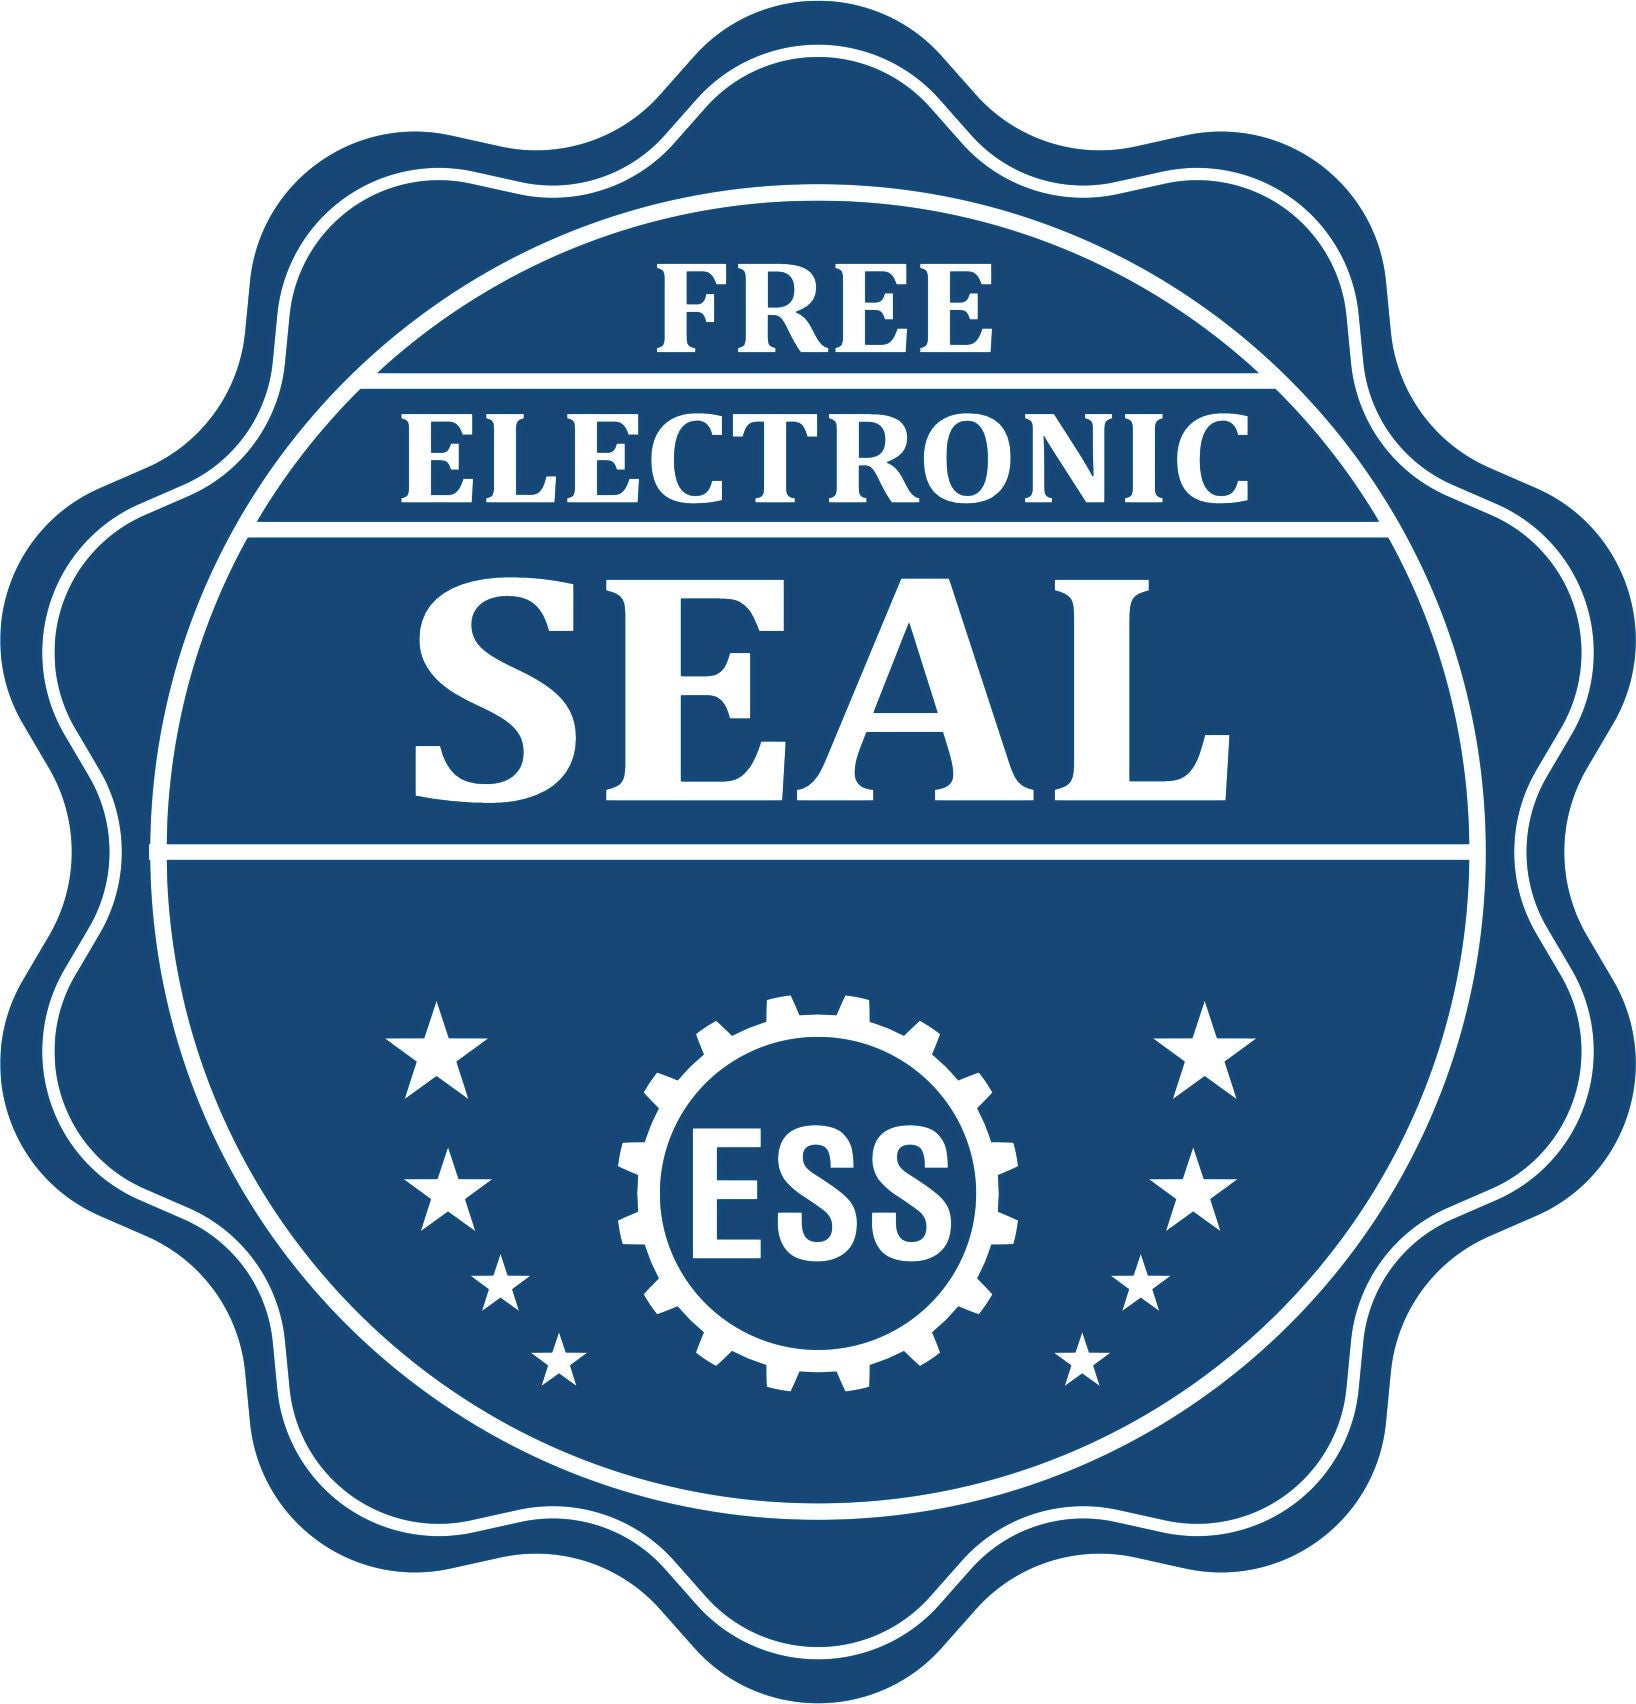 A badge showing a free electronic seal for the Super Slim Colorado Notary Public Stamp with stars and the ESS gear on the emblem.